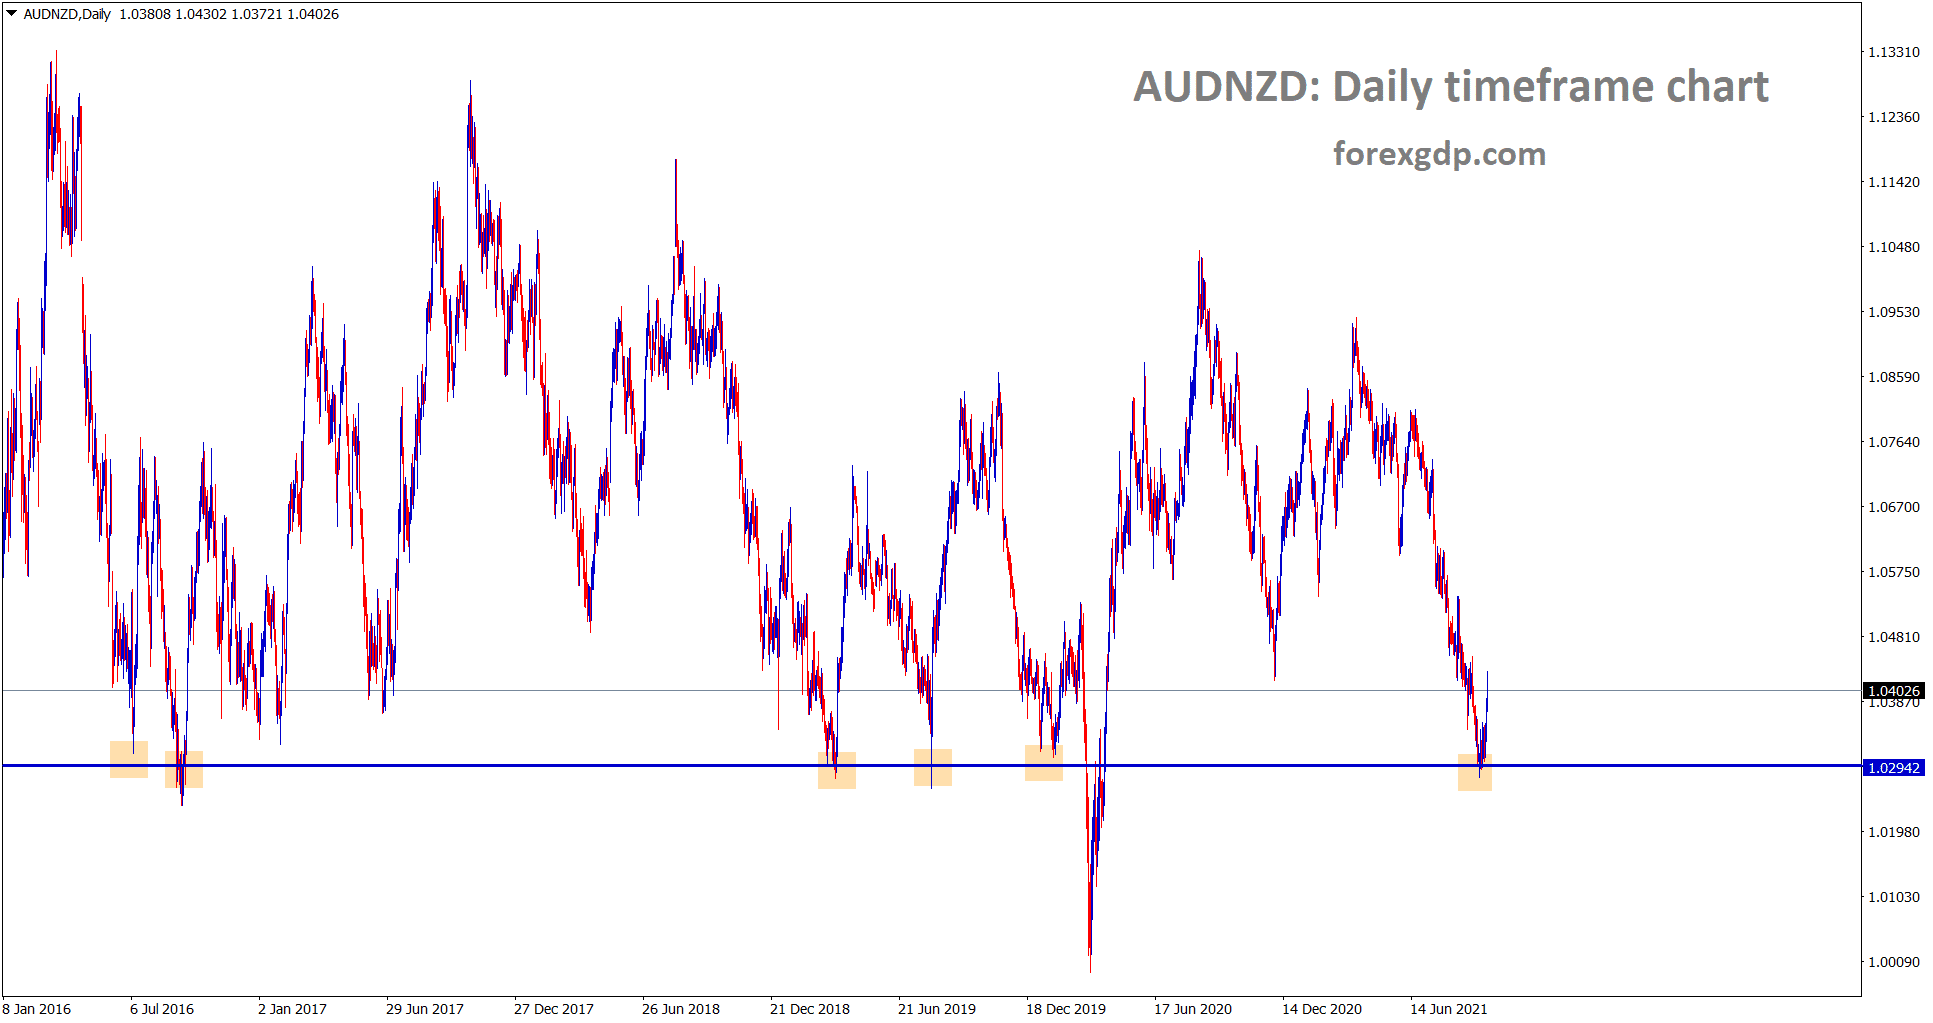 AUDNZD is rebounding from the support area